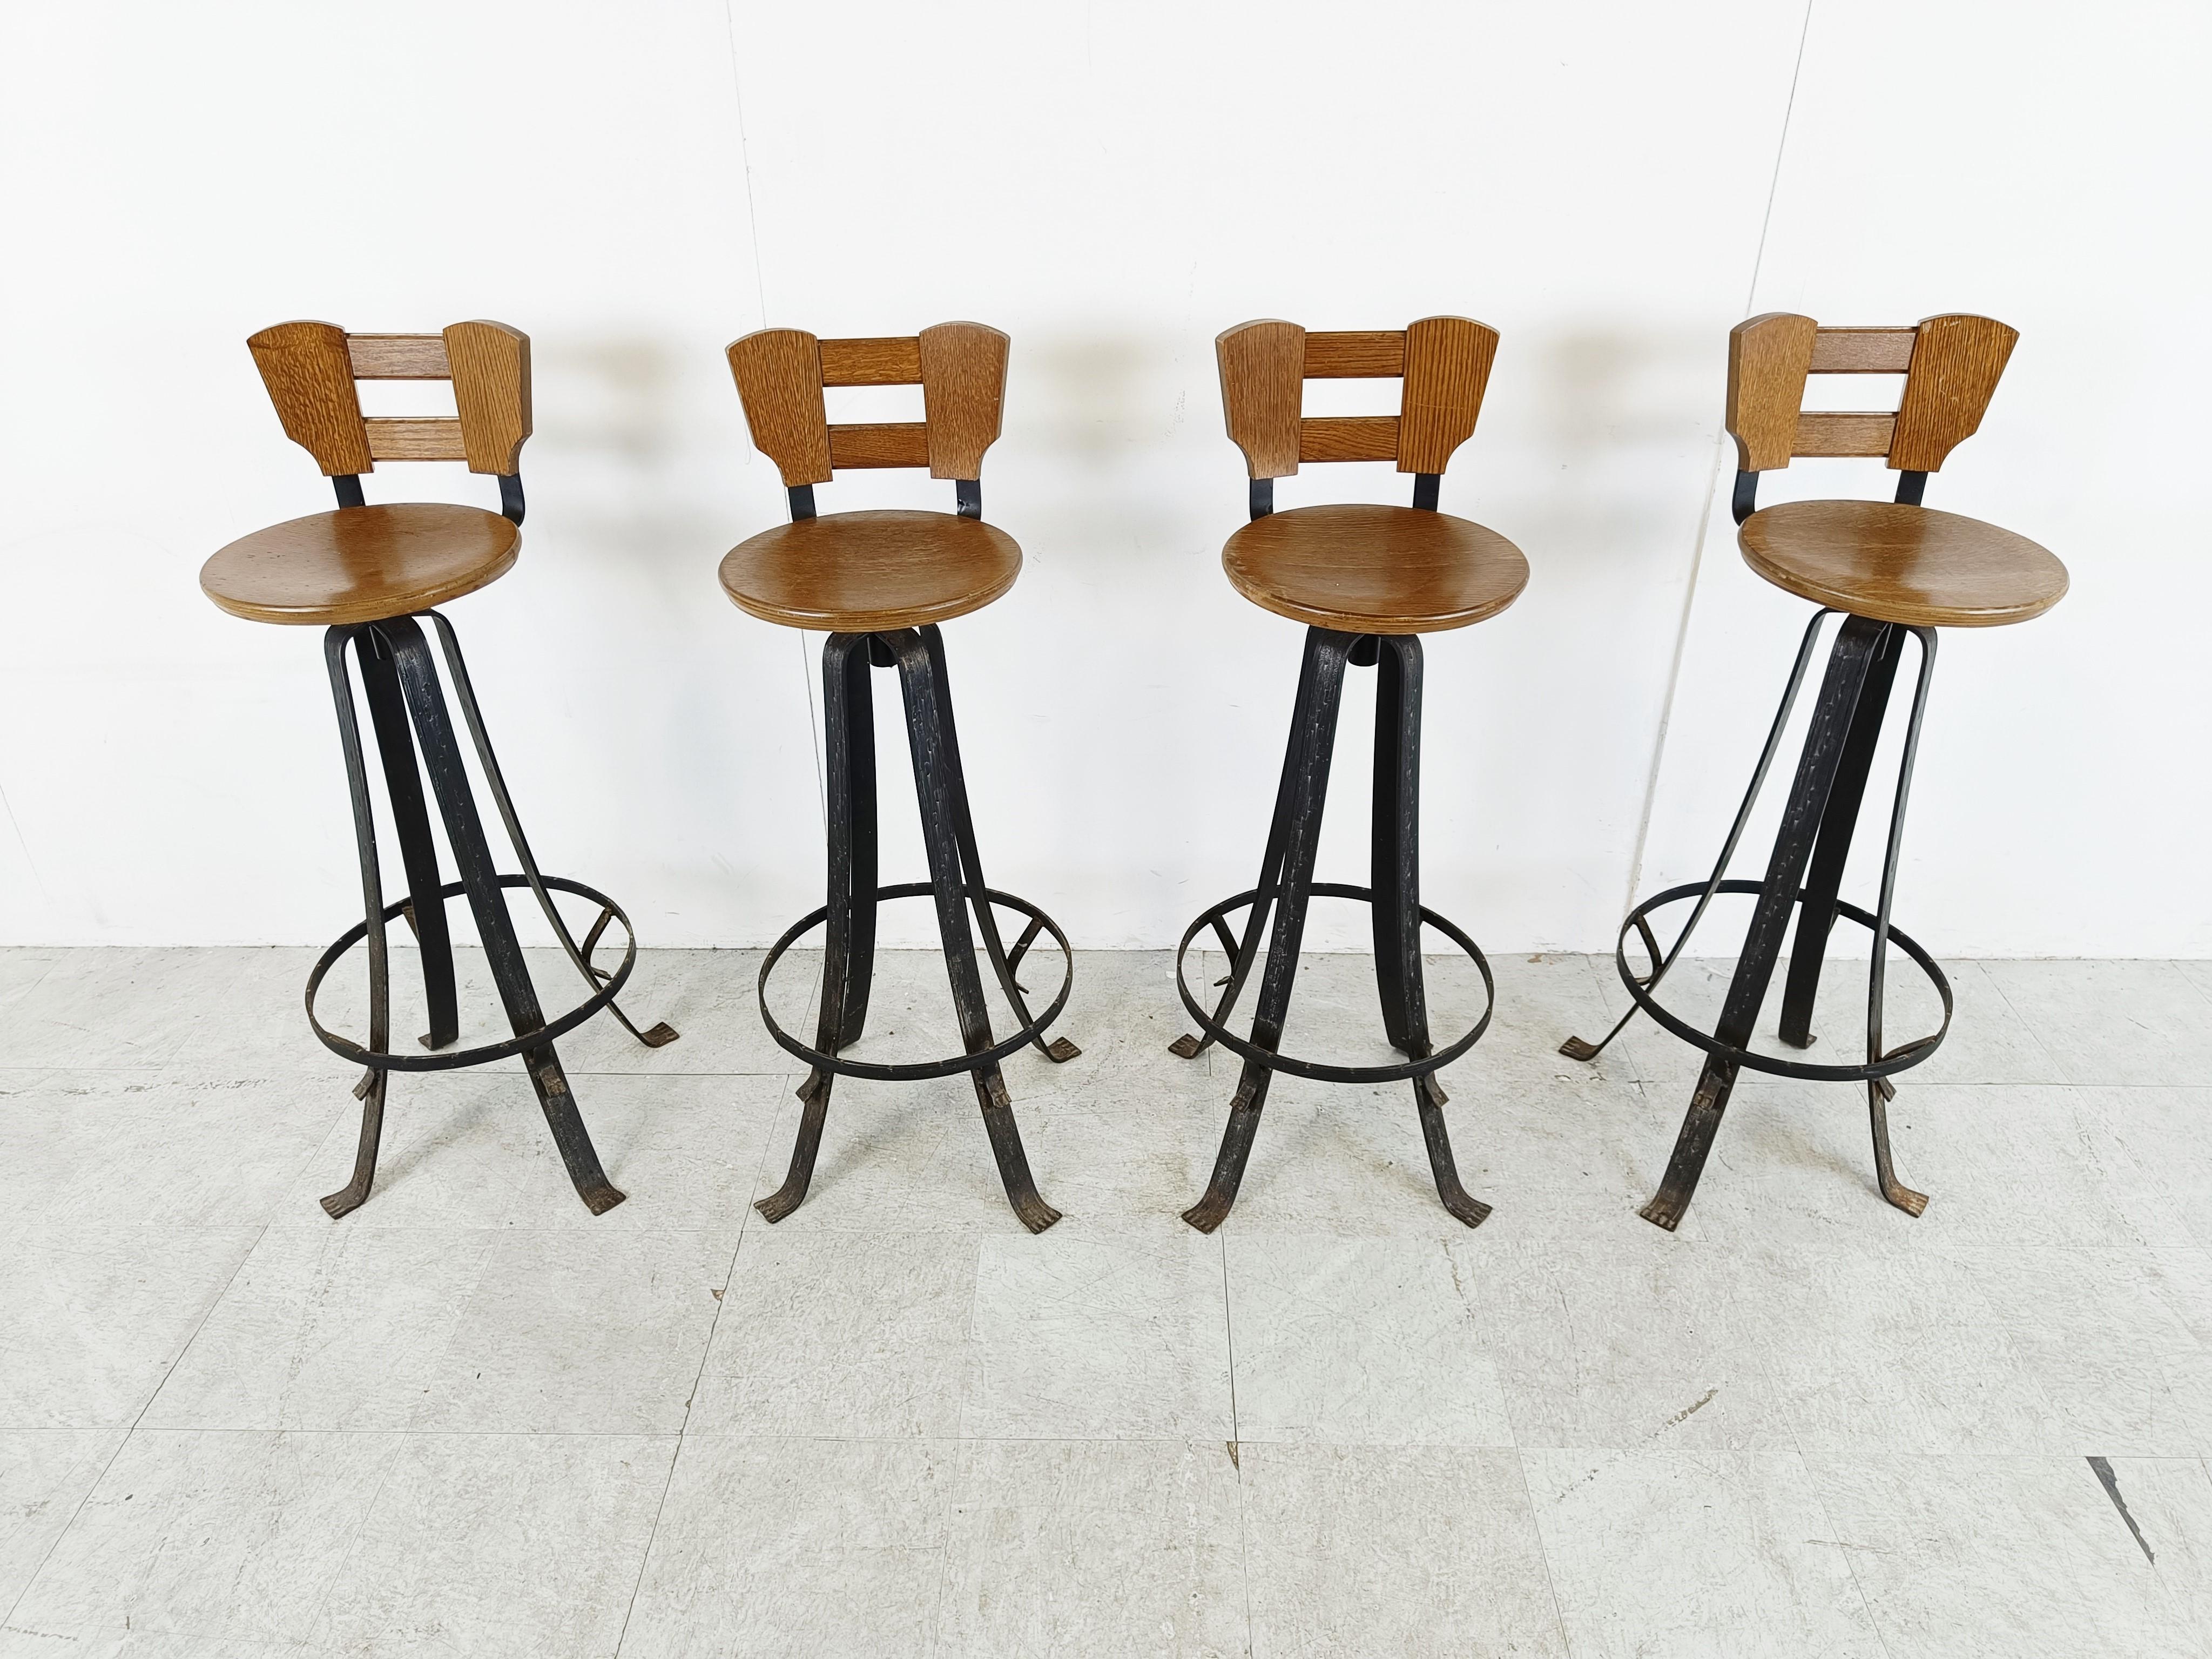 Vintage brutalist bar stools with elegant bent steel bases and wooden seats and backrests.

These bar stools are very robuste and have a nice look to them.

1970s - Germany

Dimensions:
Height: 105cm/42.78